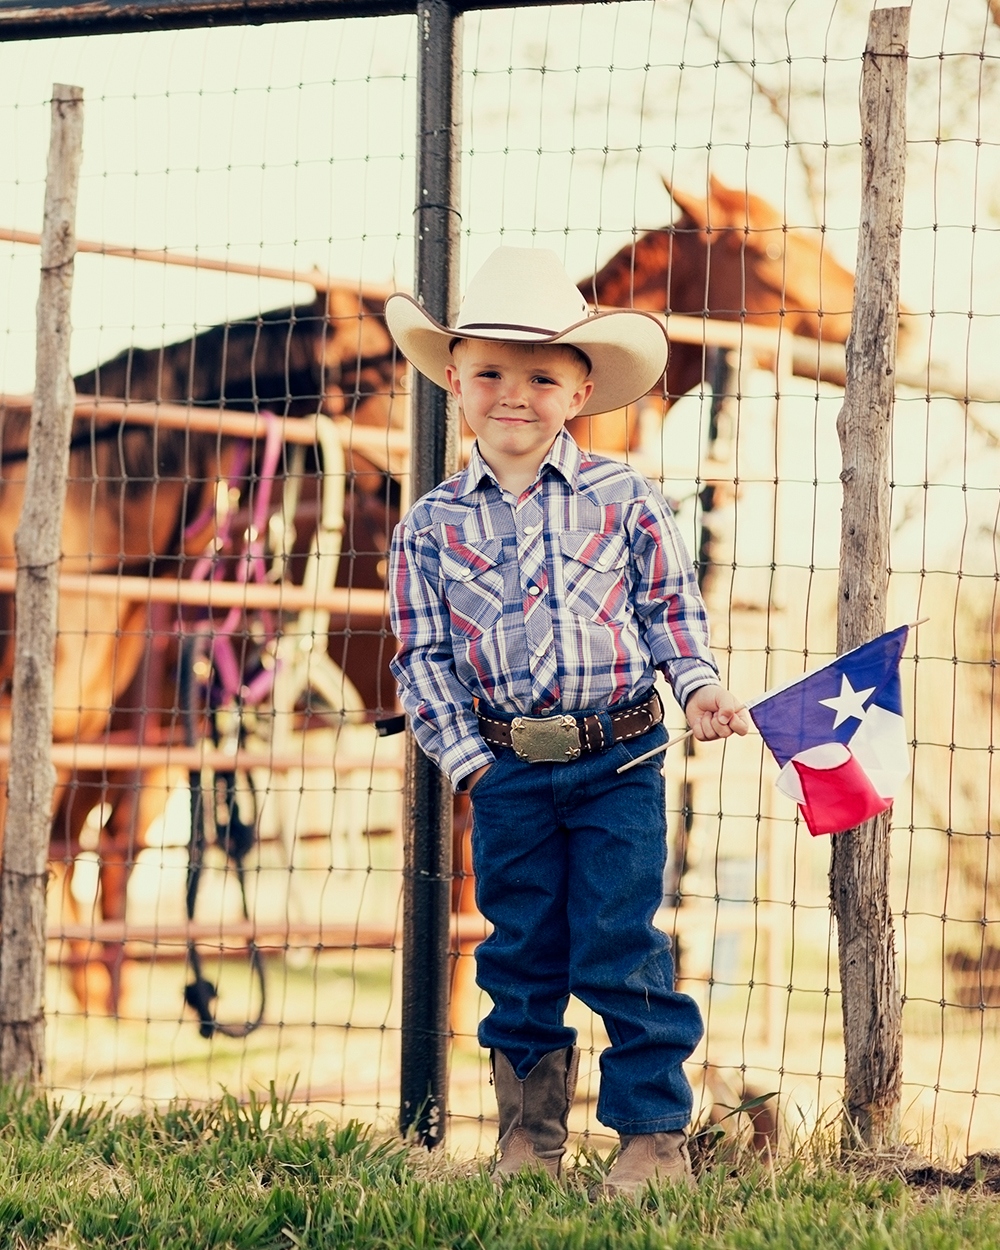 HCSC- A young cowboy shall proud to display the flag of Texas.